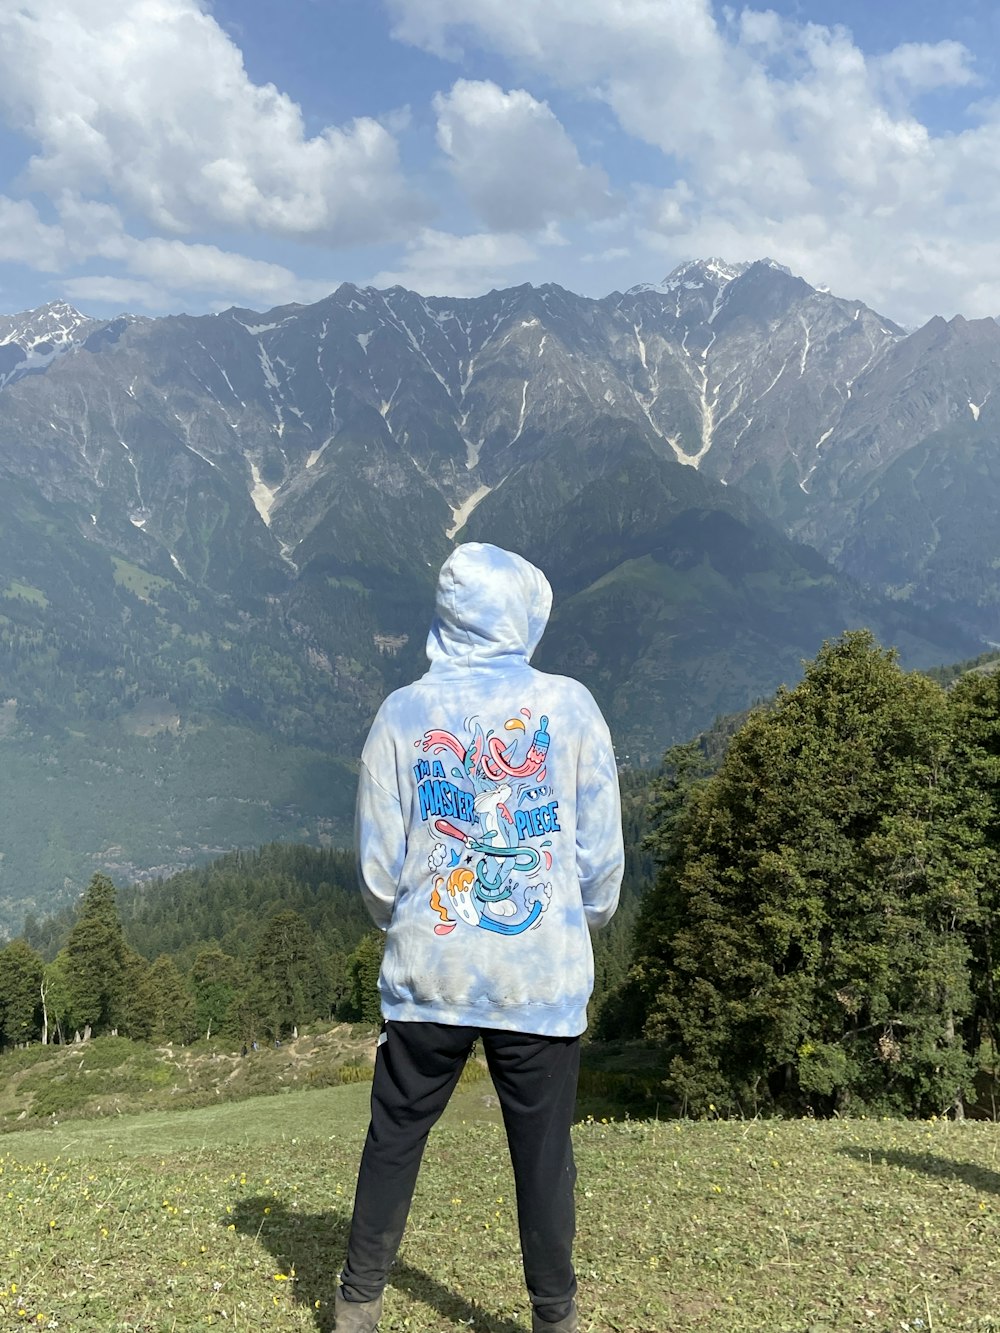 a person wearing a hoodie and standing on a grassy hill with trees and mountains in the background